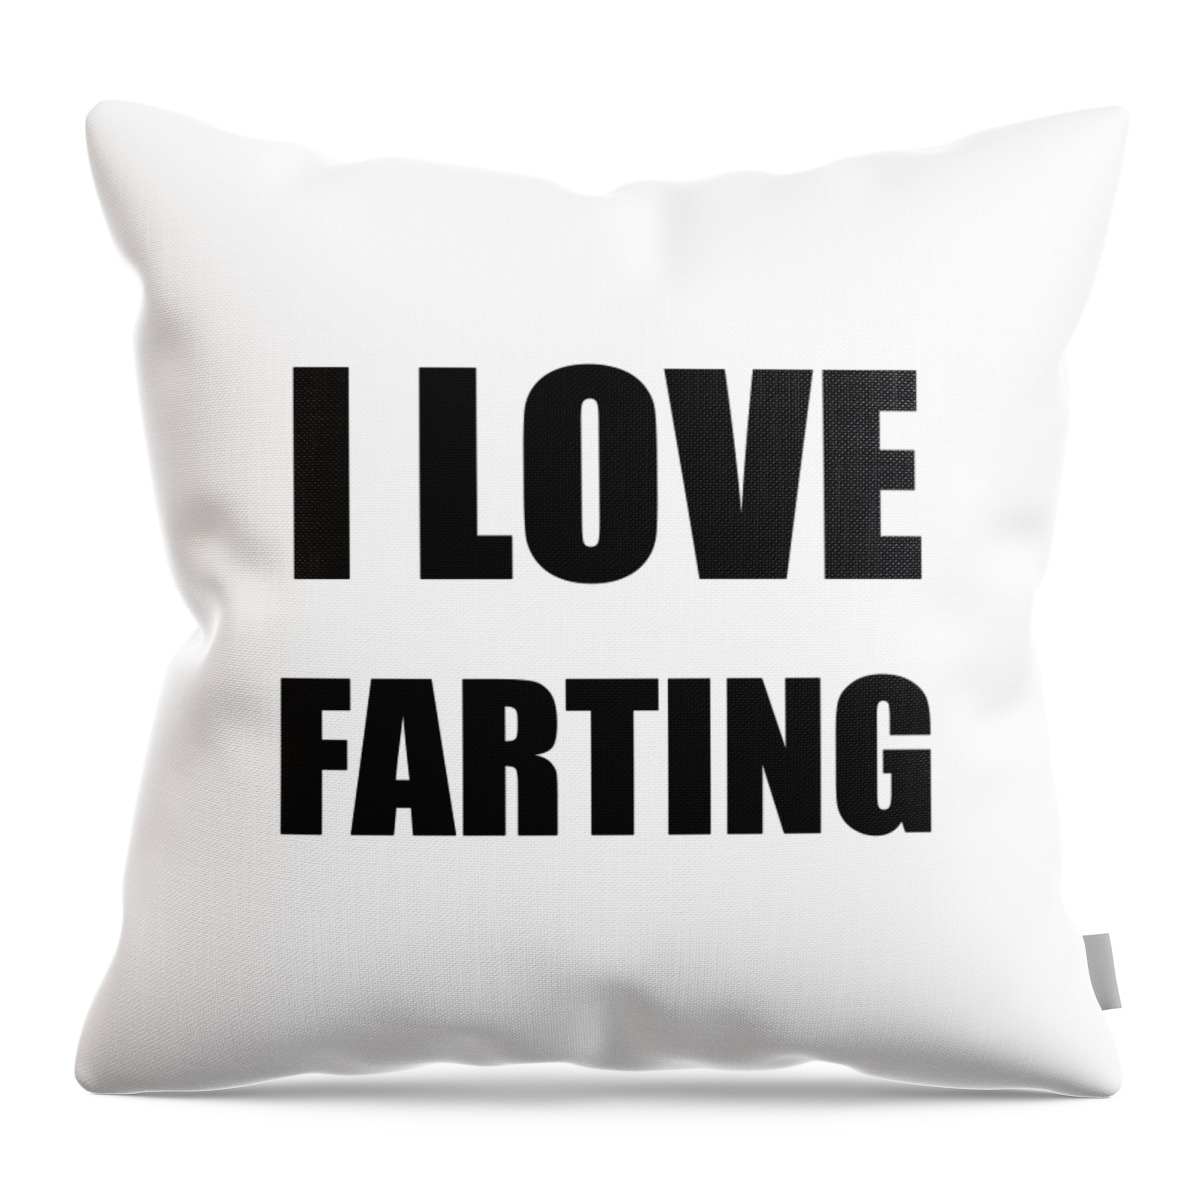 debra schroeder recommends farting on a pillow pic